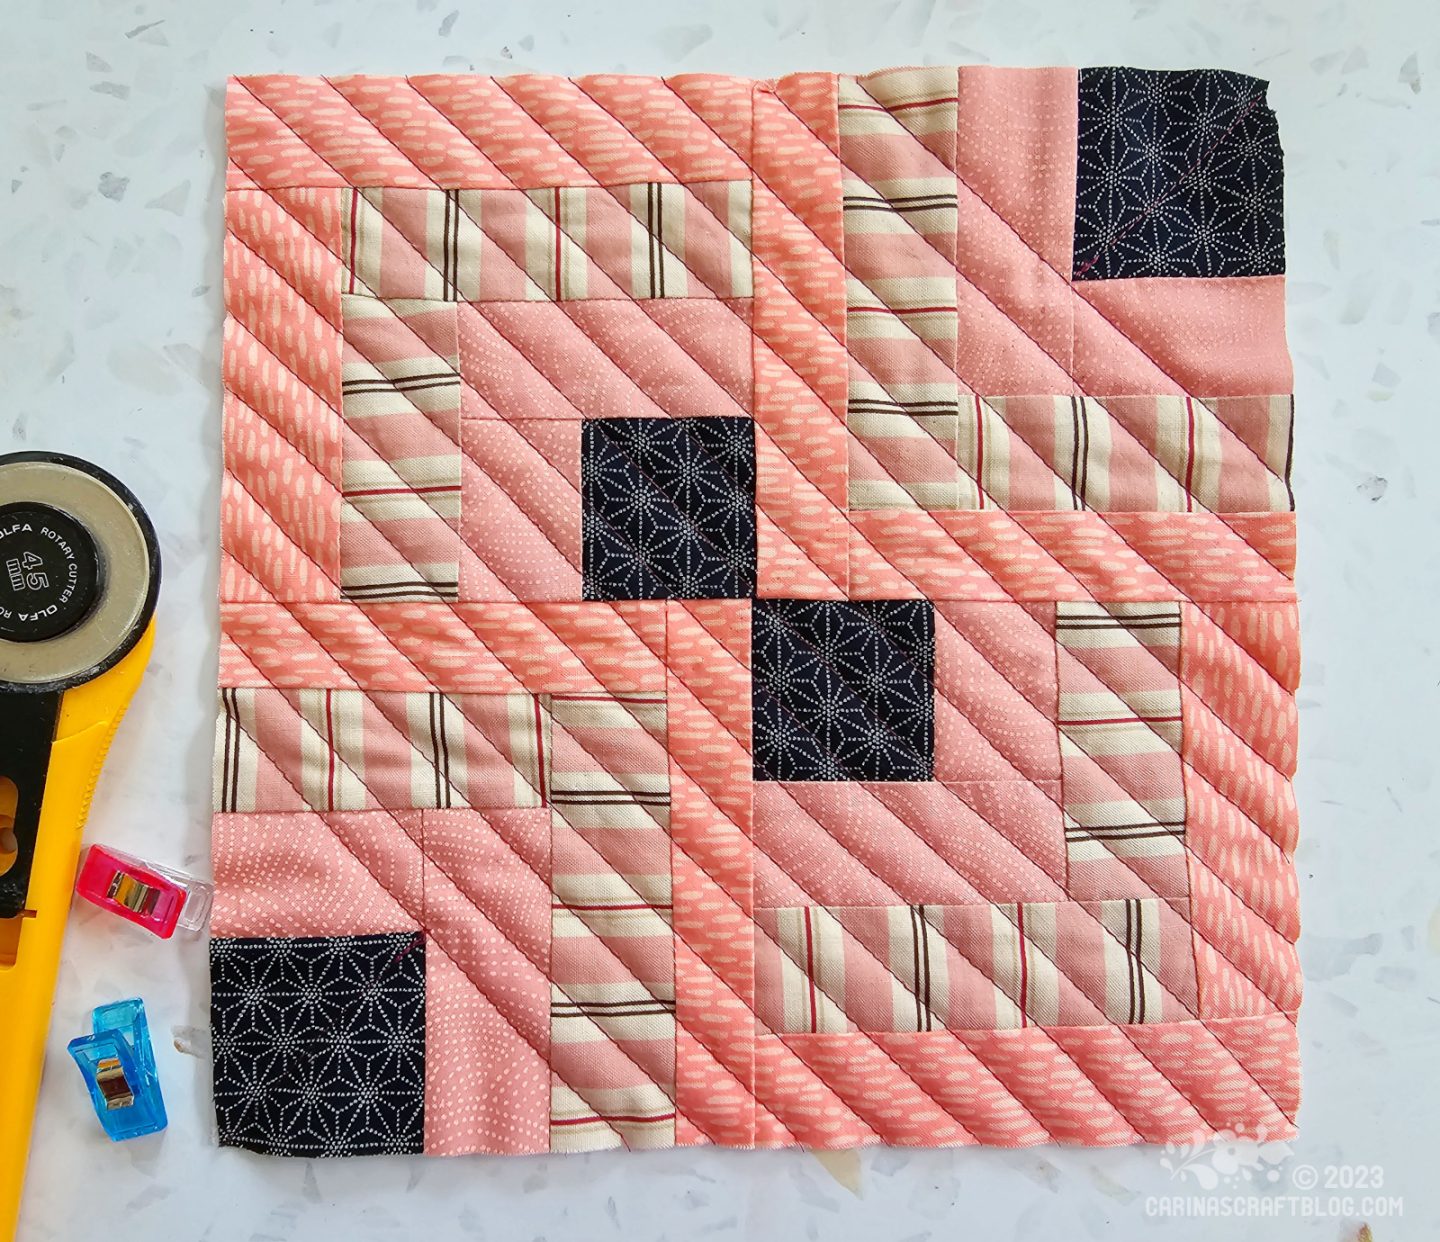 A small square quilt made of four square blocks each with a dark blue square in one corner, surrounded by strips of salmon coloured fabrics.